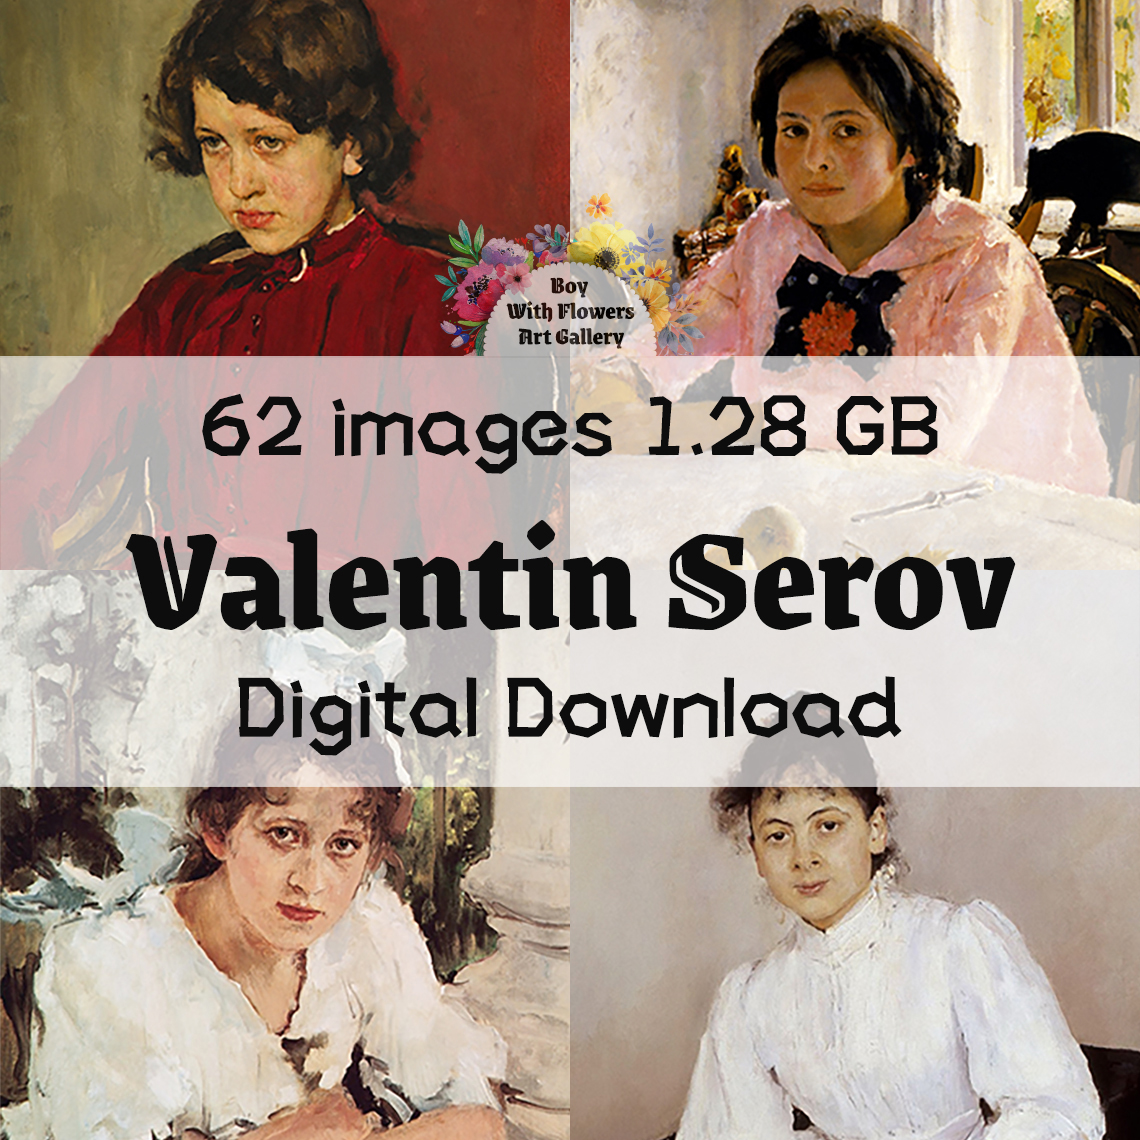 A collection of 62 high-resolution digital images of Valentin Serov
▶️boywithflower.gumroad.com/l/xwjxs
▶️boywithflowers.com/product/valent…
▶️patreon.com/posts/64366352

Get more digital paintings.
boywithflower.gumroad.com
boywithflowers.com
patreon.com/boy_with_flowe…

#valentinserov #digitalart #art